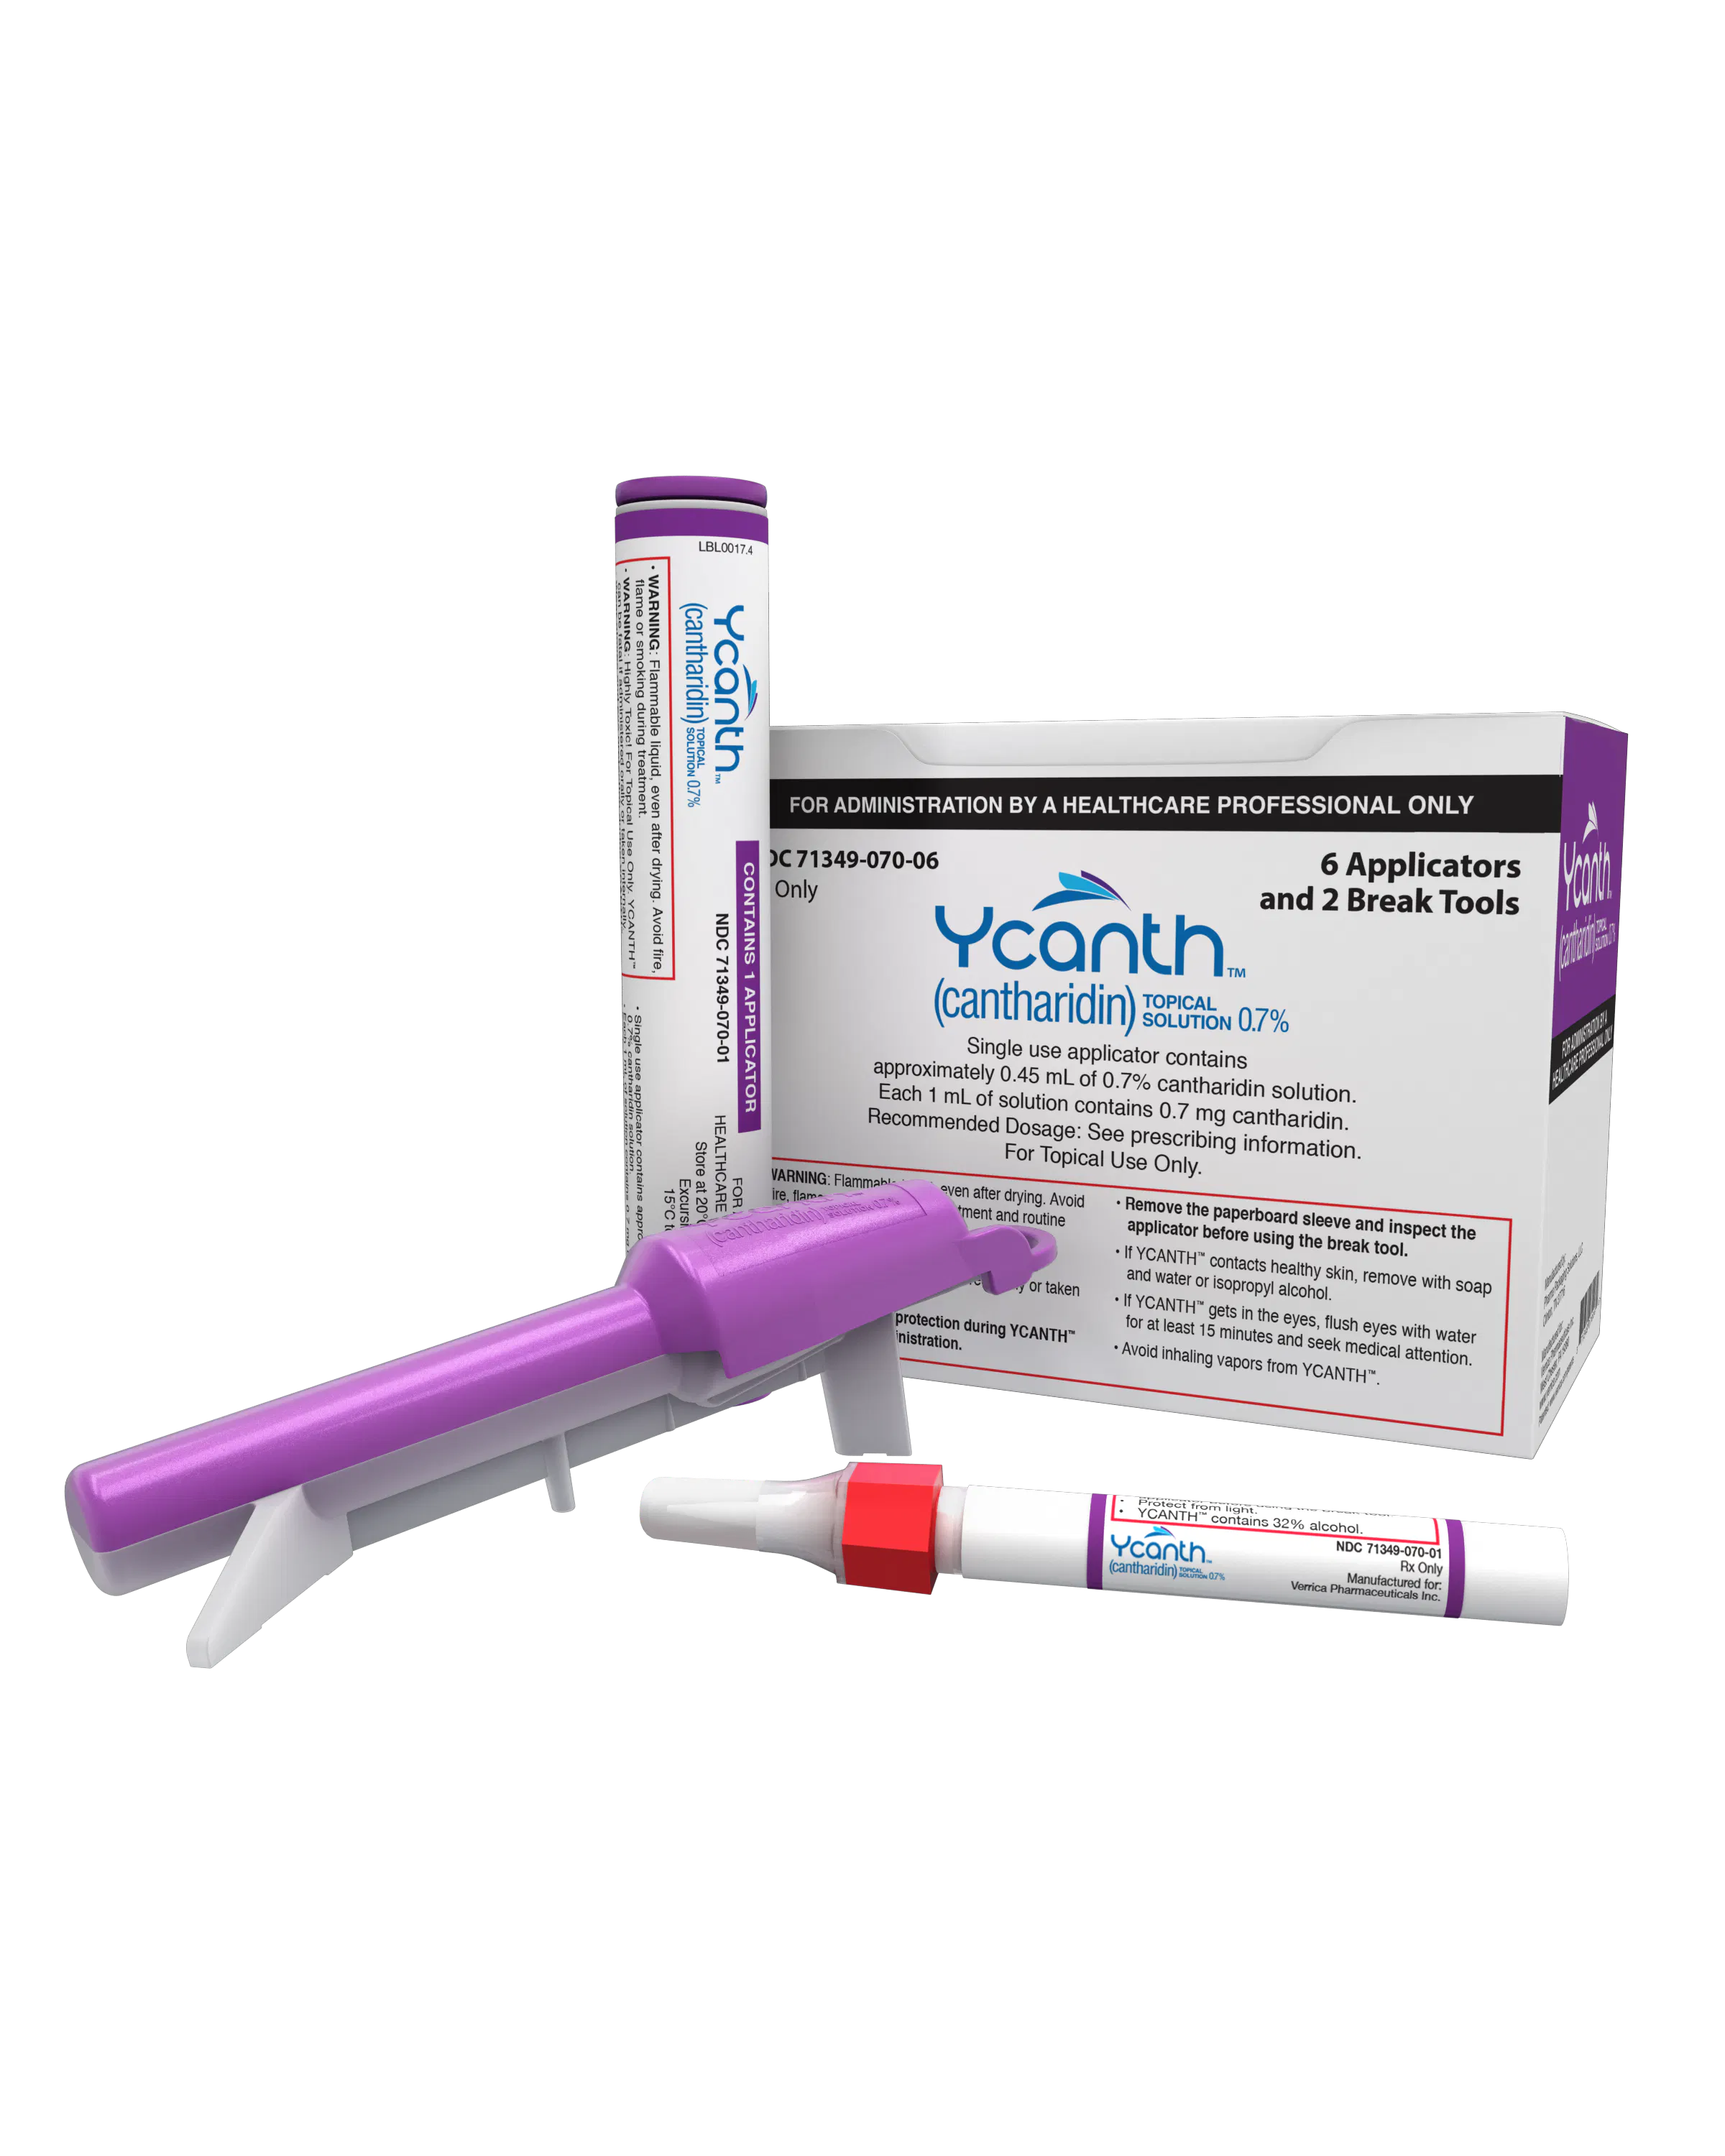 Verrica Pharmaceuticals’ VP-102 (Ycanth) was approved by the US Food and Drug Administration (FDA) for the treatment of molluscum contagiosum on July 21, 2023. Image courtesy of Verrica Pharmaceuticals.